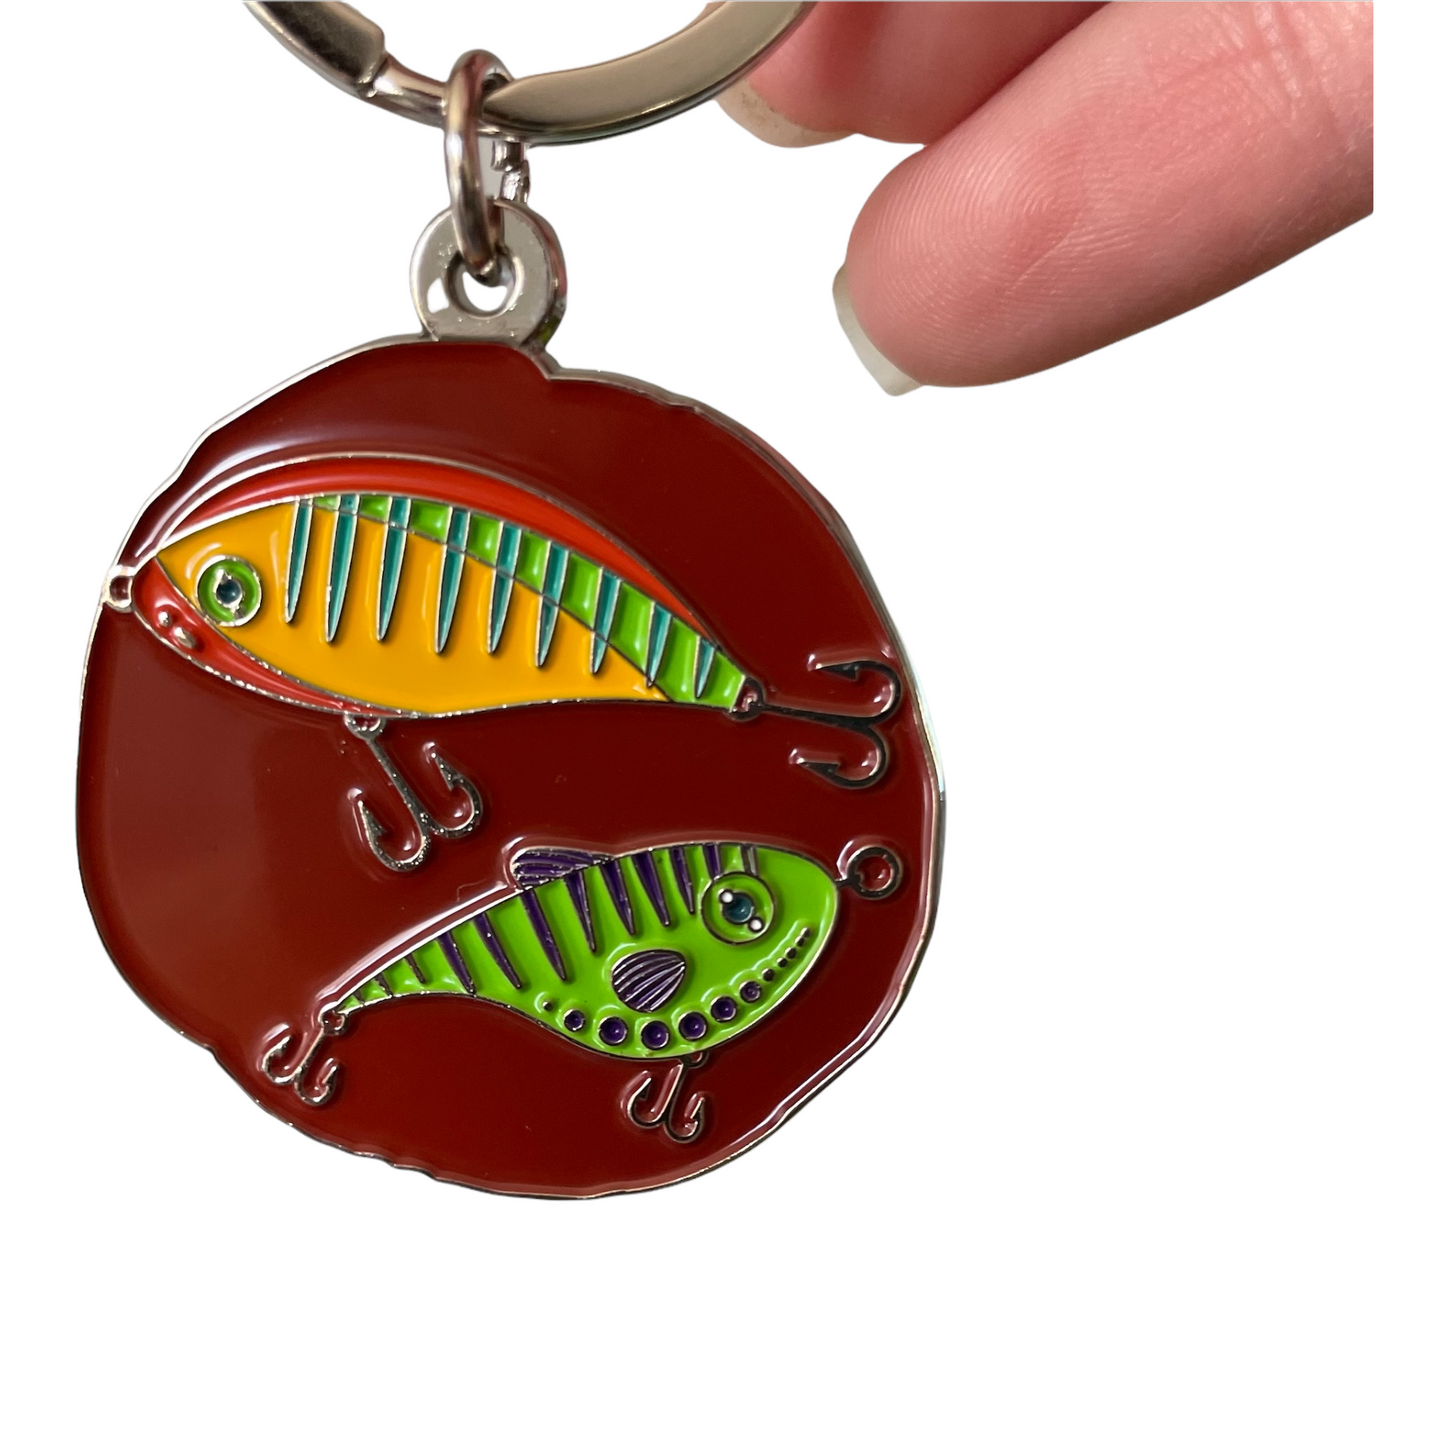 Fishing Lure KeyChain Accessories - Sew Fetch Dog Company